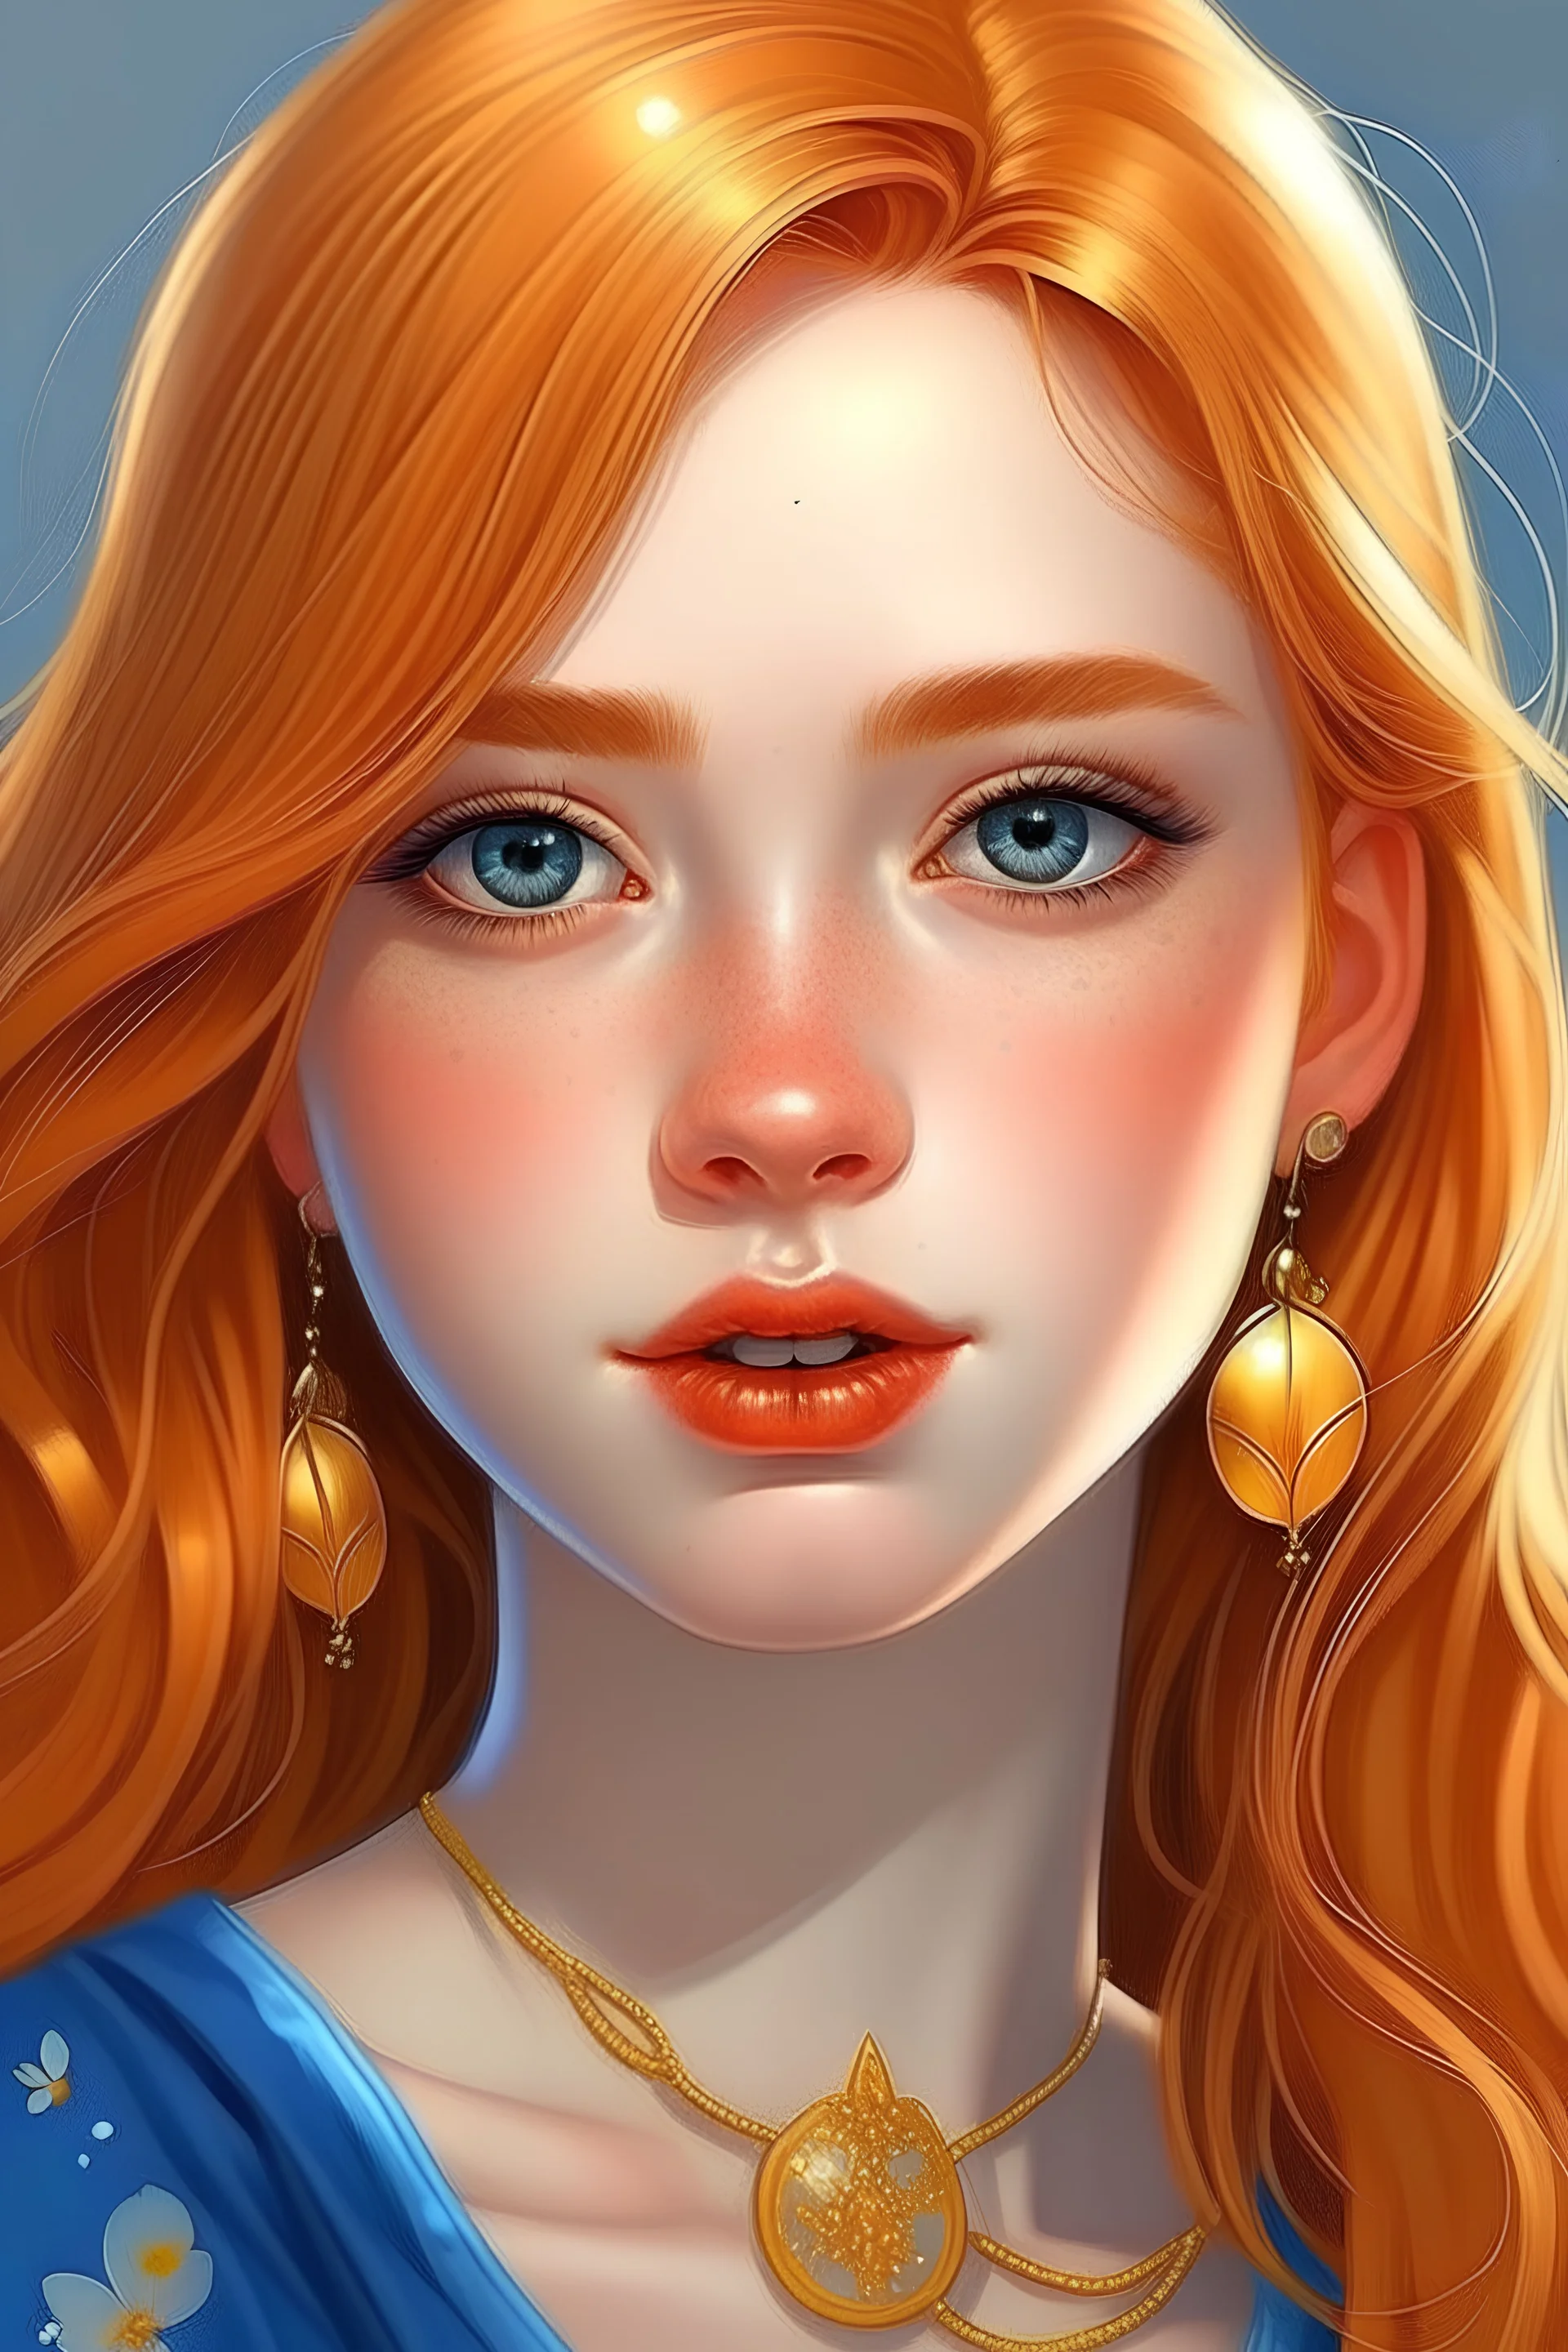 draw me a picture of a girl that has strawberry blonde hair, she has blue eyes and a little sharp nose and small lips, she wears gold earrings and has makeup on